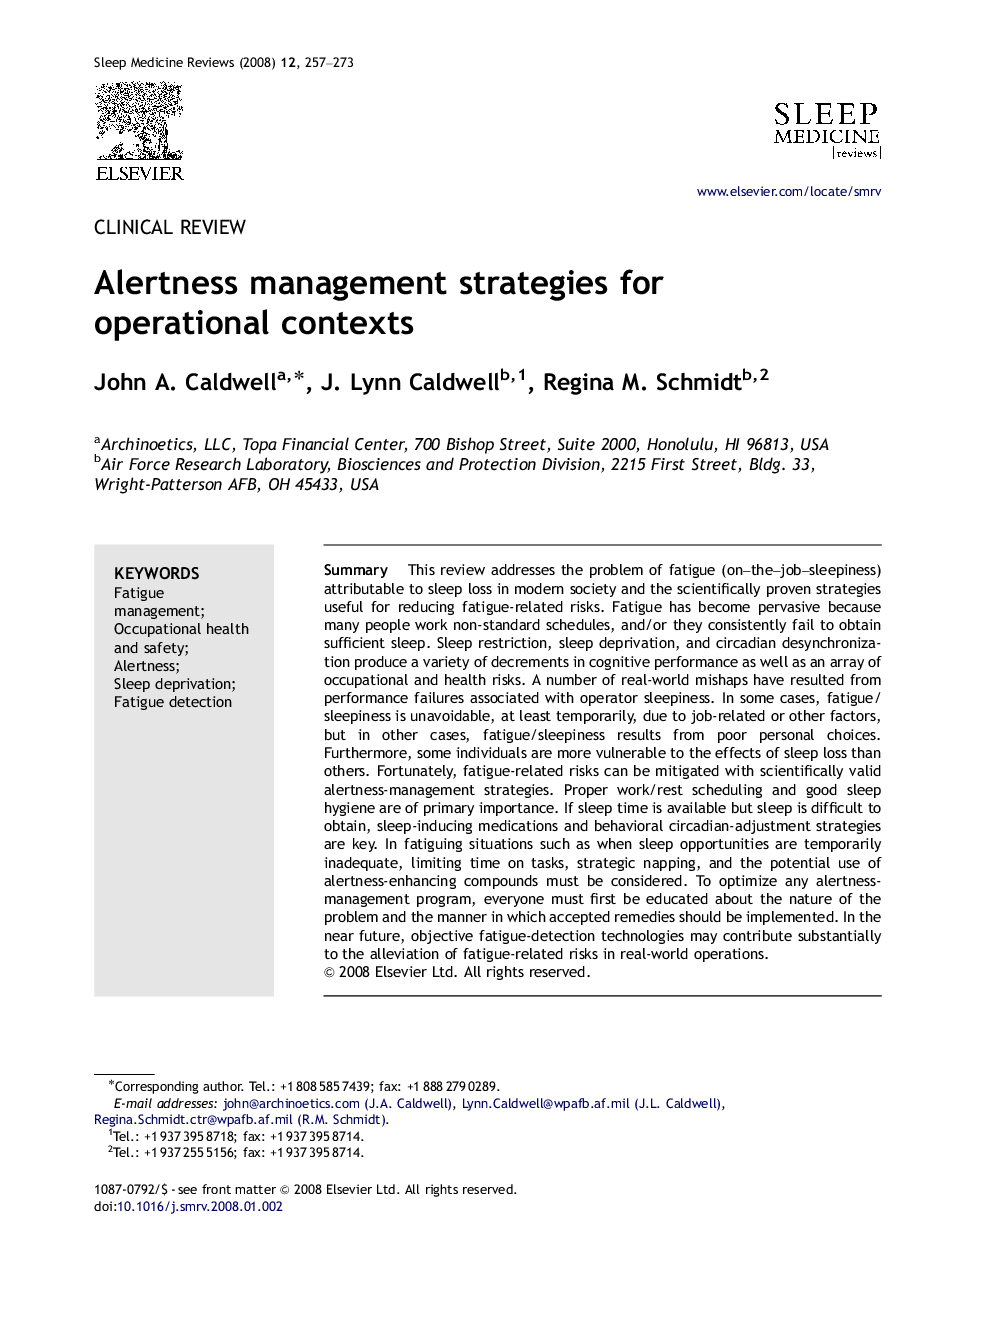 Alertness management strategies for operational contexts